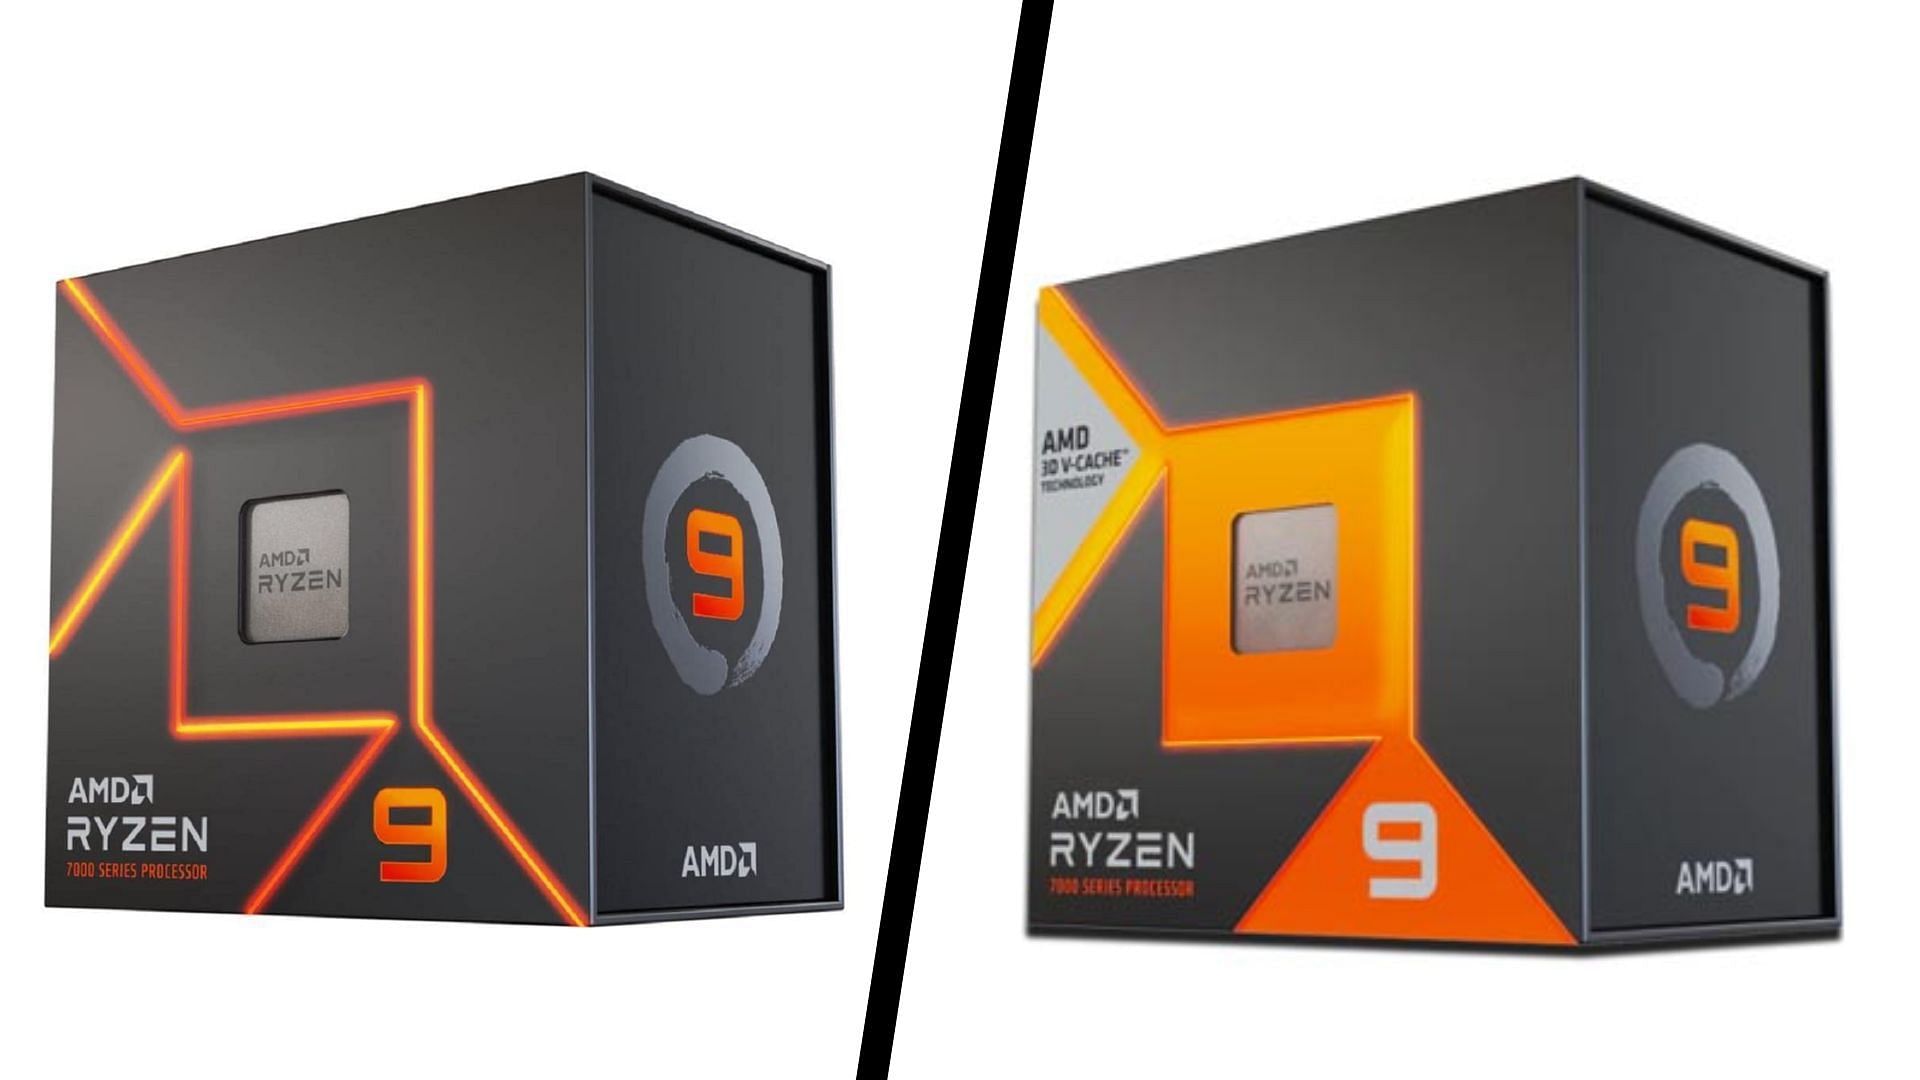 AMD Ryzen 9 7950X3D vs Ryzen 9 7950X: Which is the better option for gaming?